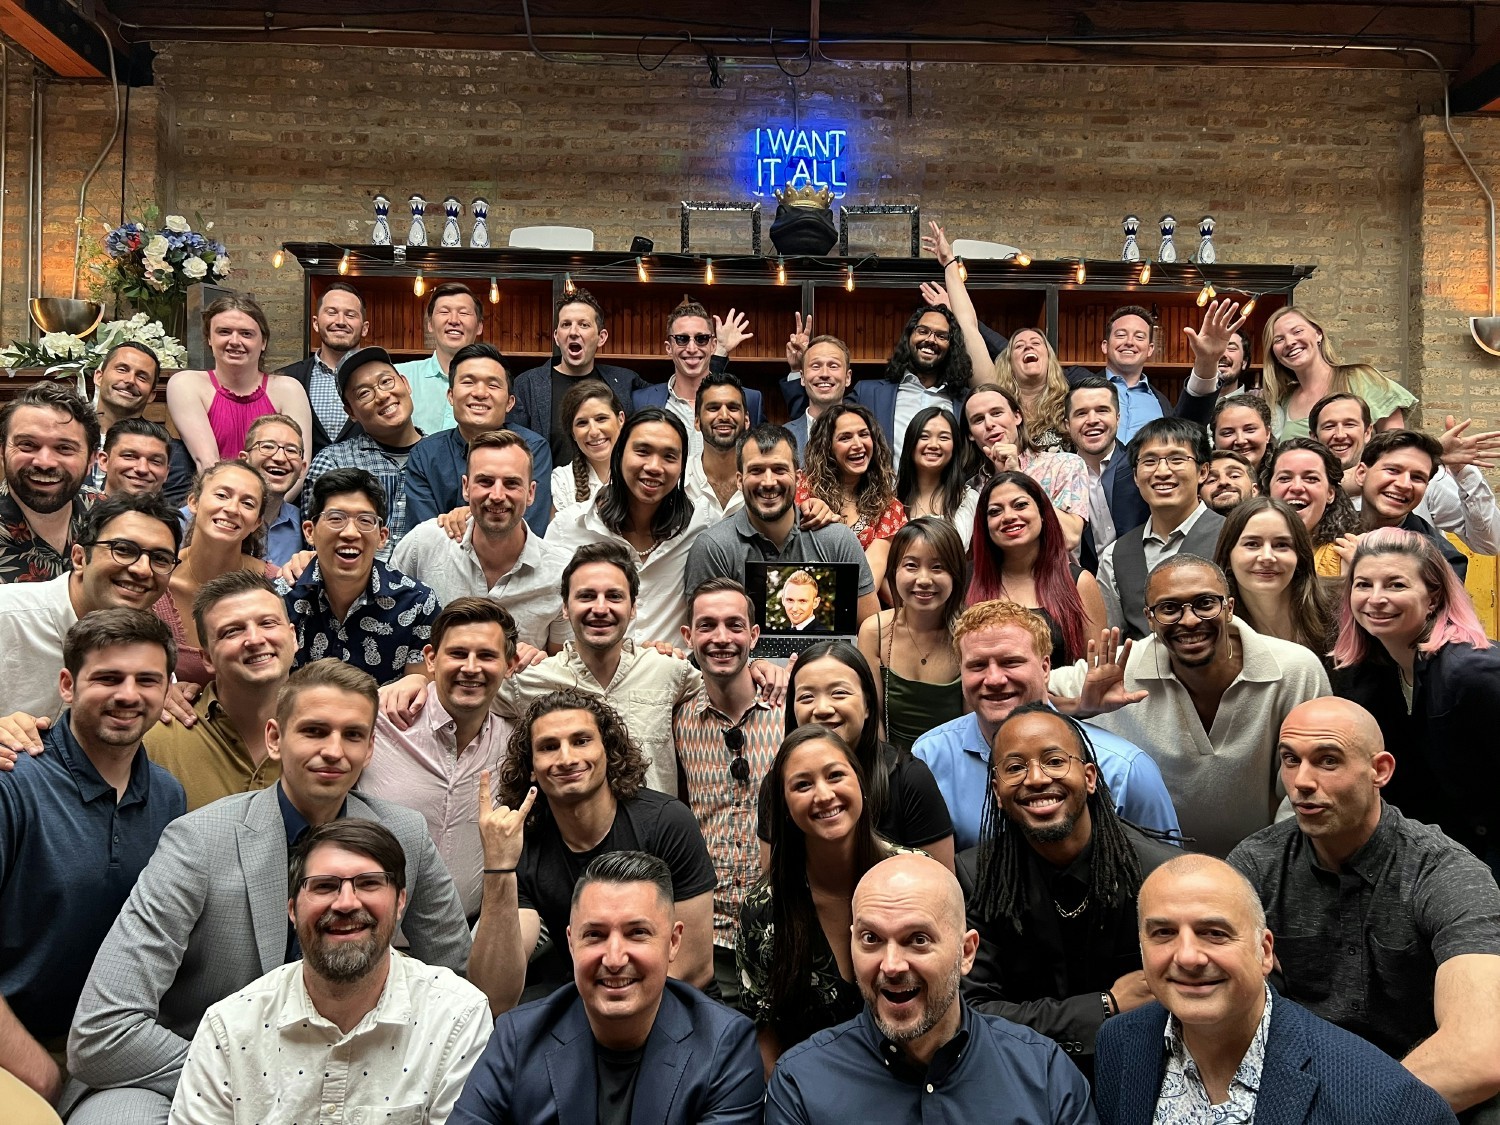 Mutineers at our August 2022 offsite in Chicago, Illinois